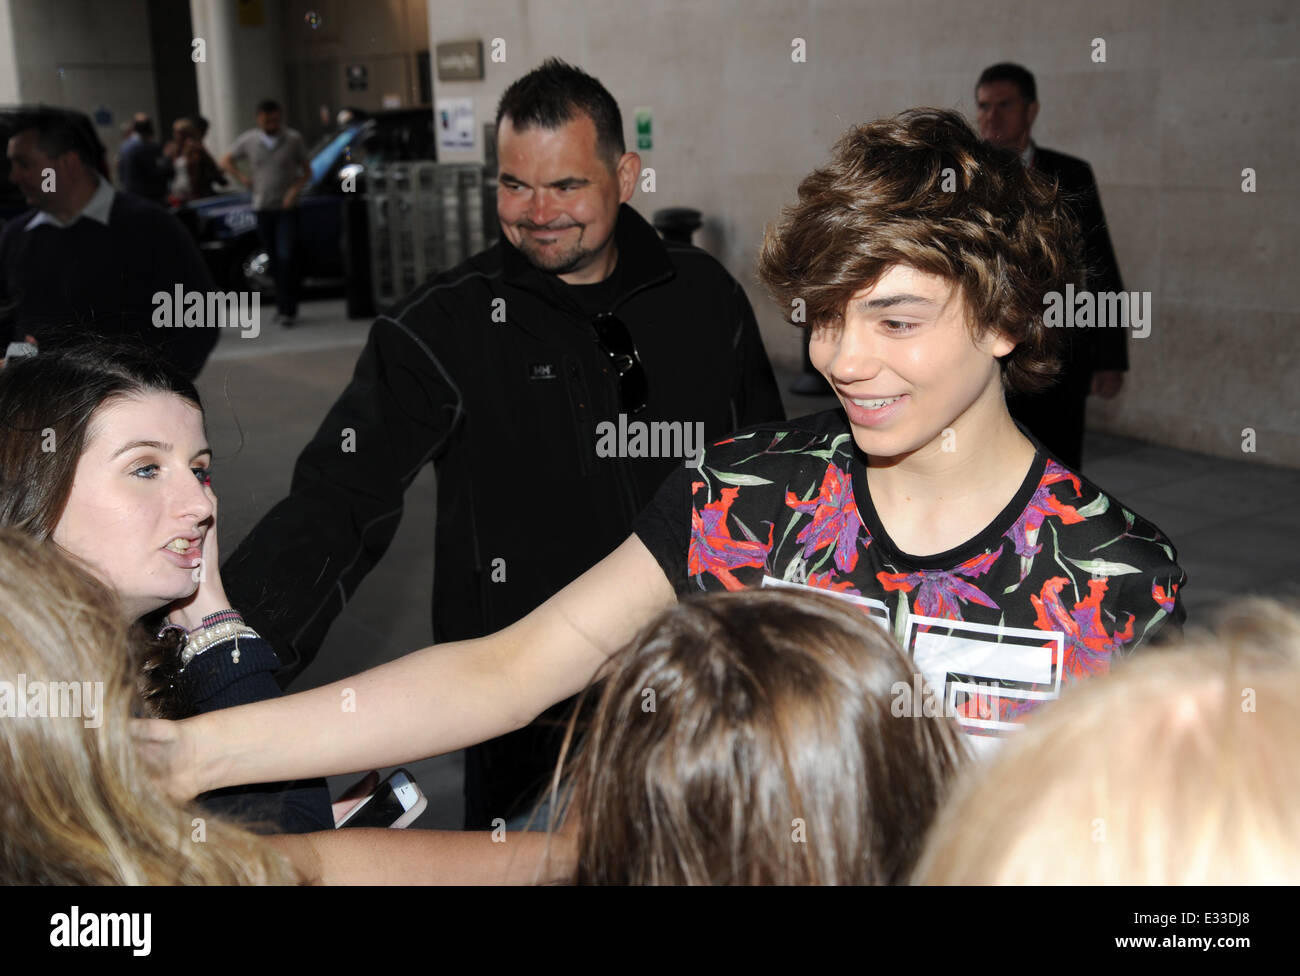 George Shelley of Union J pictured at BBC Radio 1. Featuring: George ...